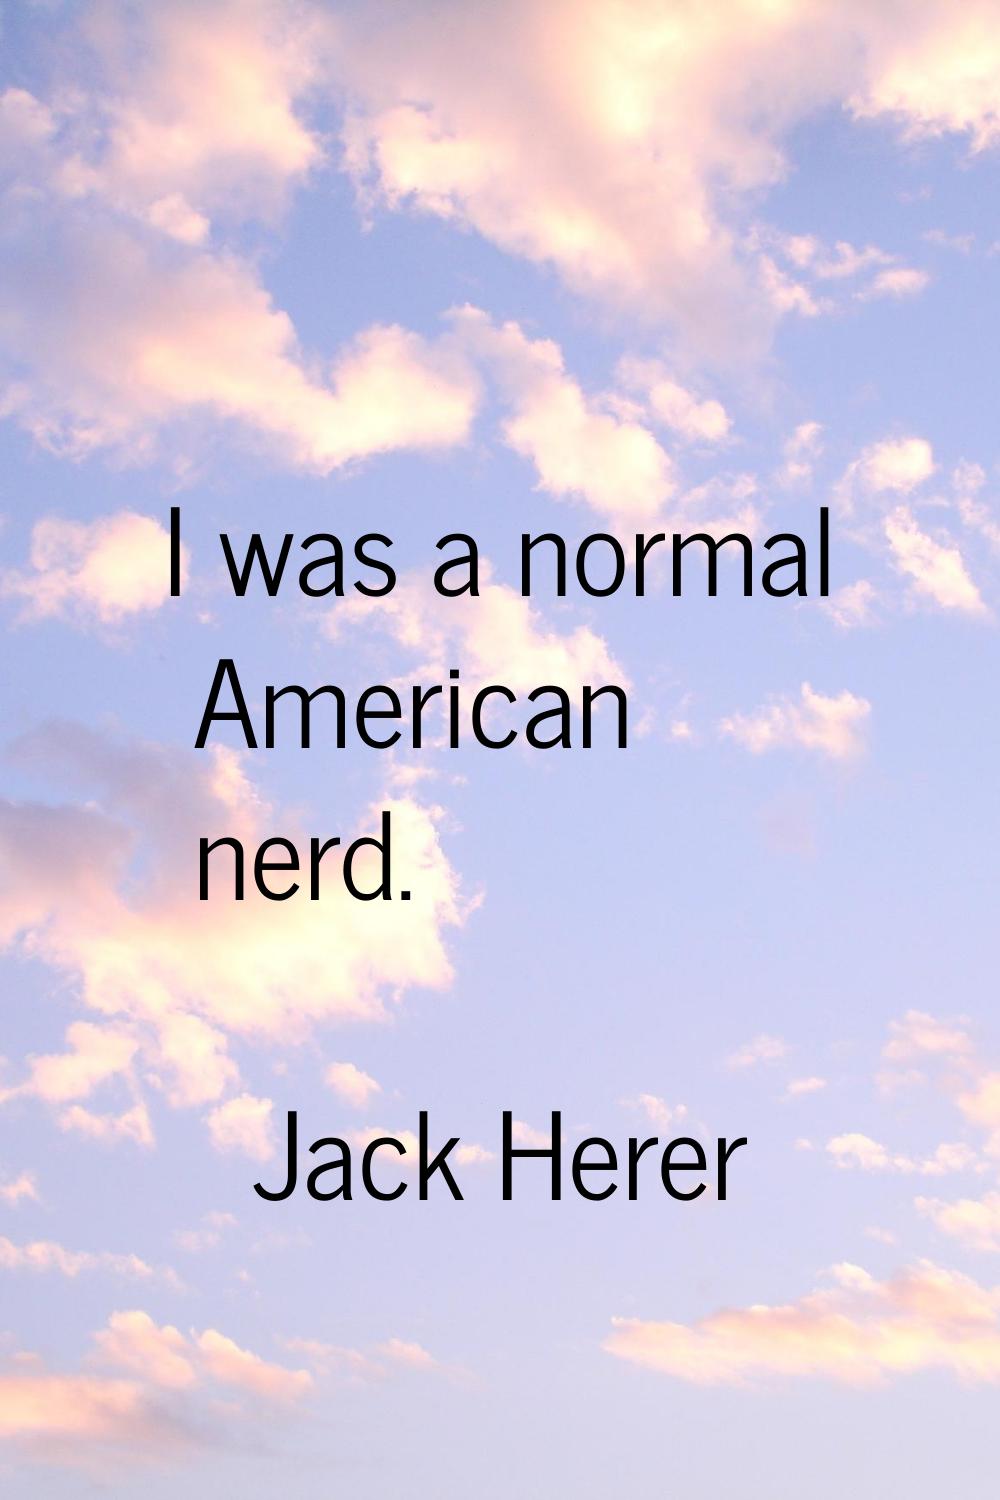 I was a normal American nerd.